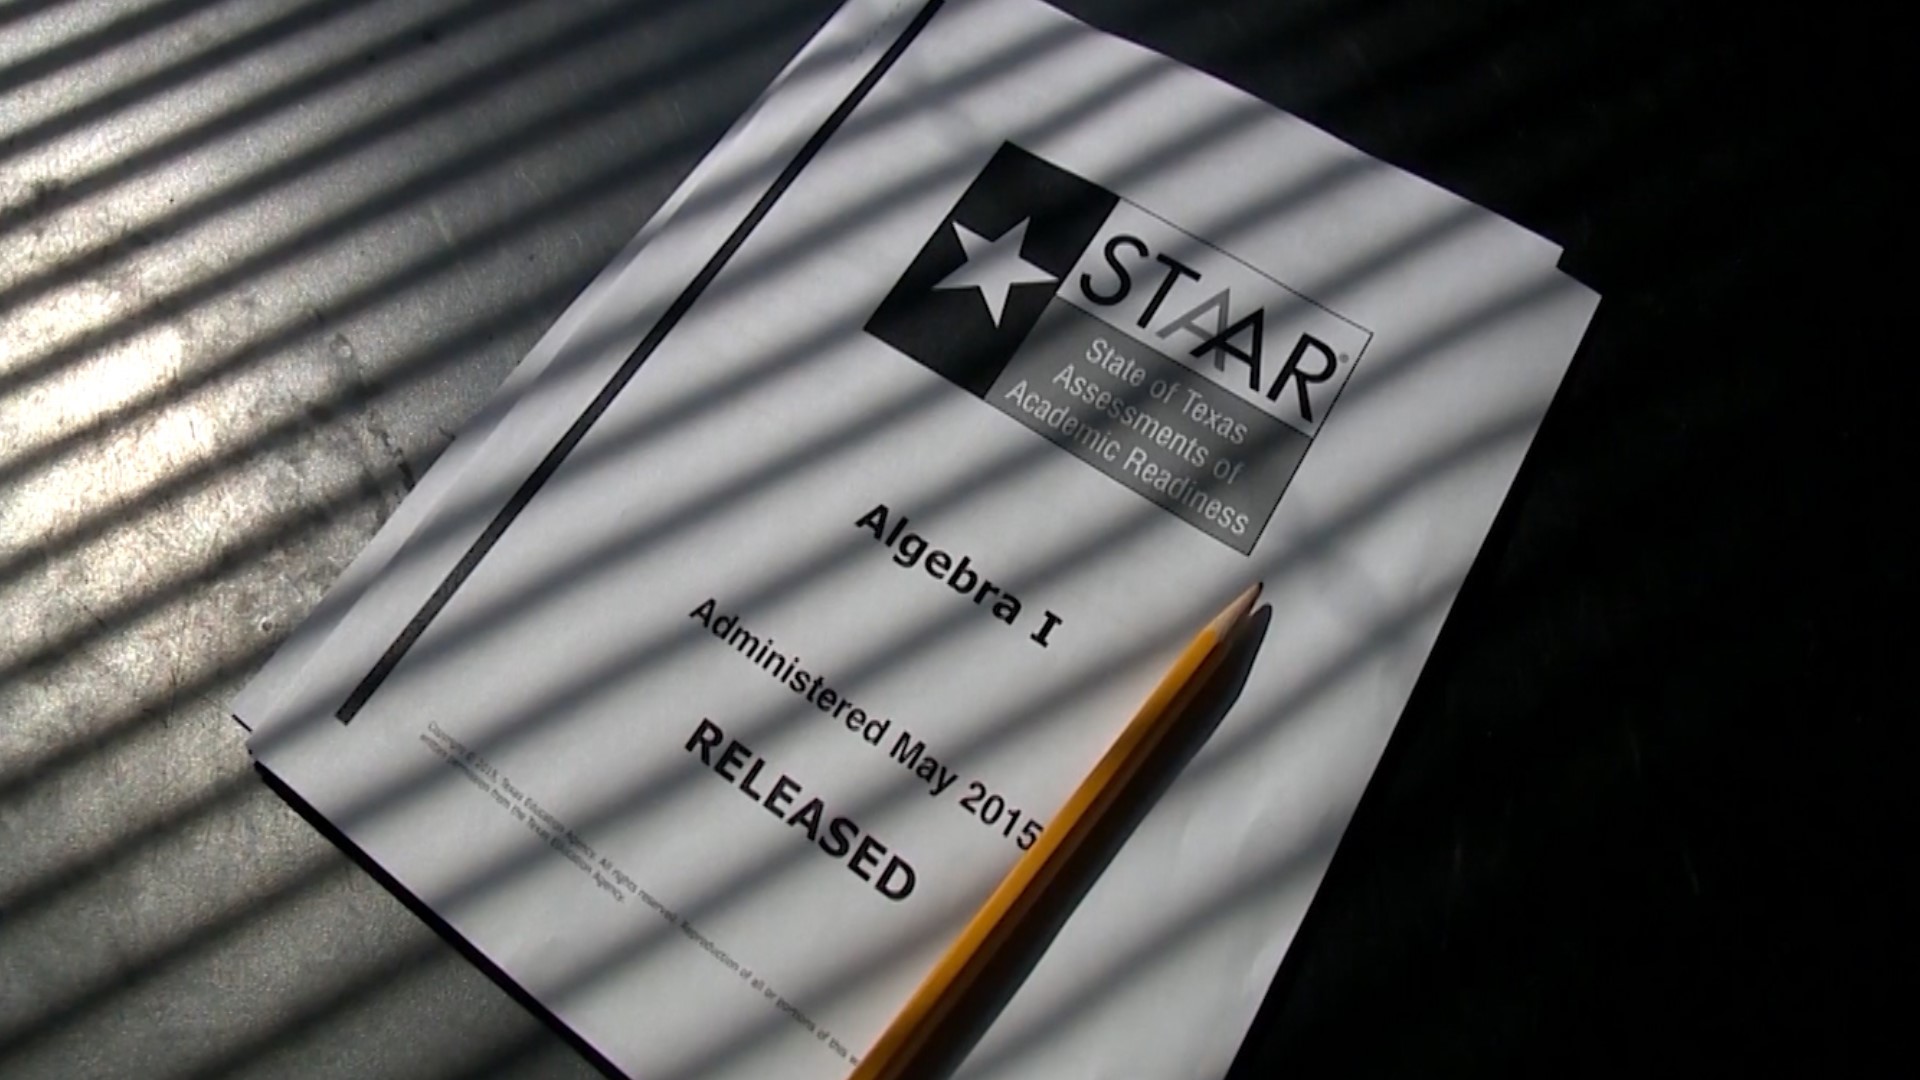 The Temple ISD Board of Trustees voted on a resolution to ask the Education Commissioner to waive the STARR test for the 2020-2021 school year